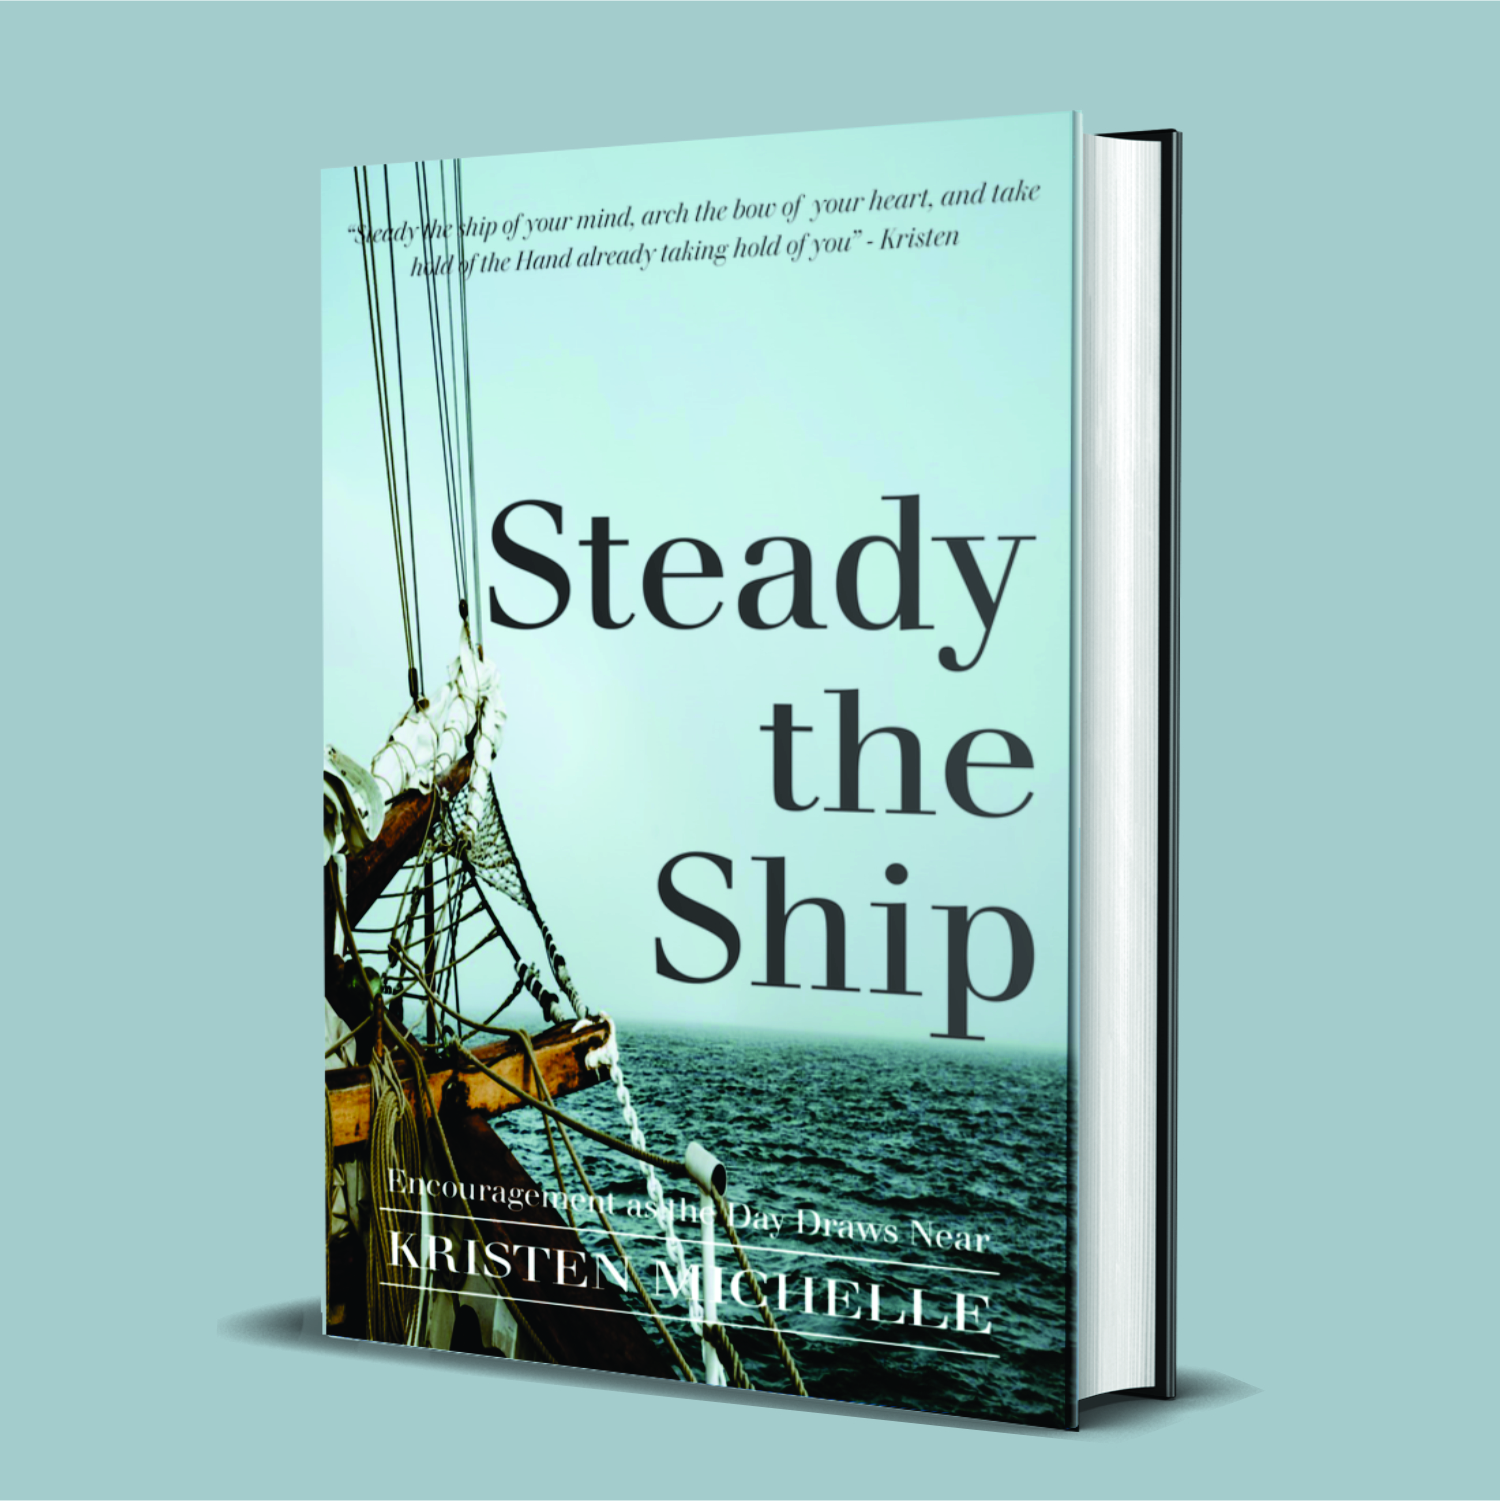 Steady the Ship: Encouragement as the Day Draws Near. By Kristen Michelle